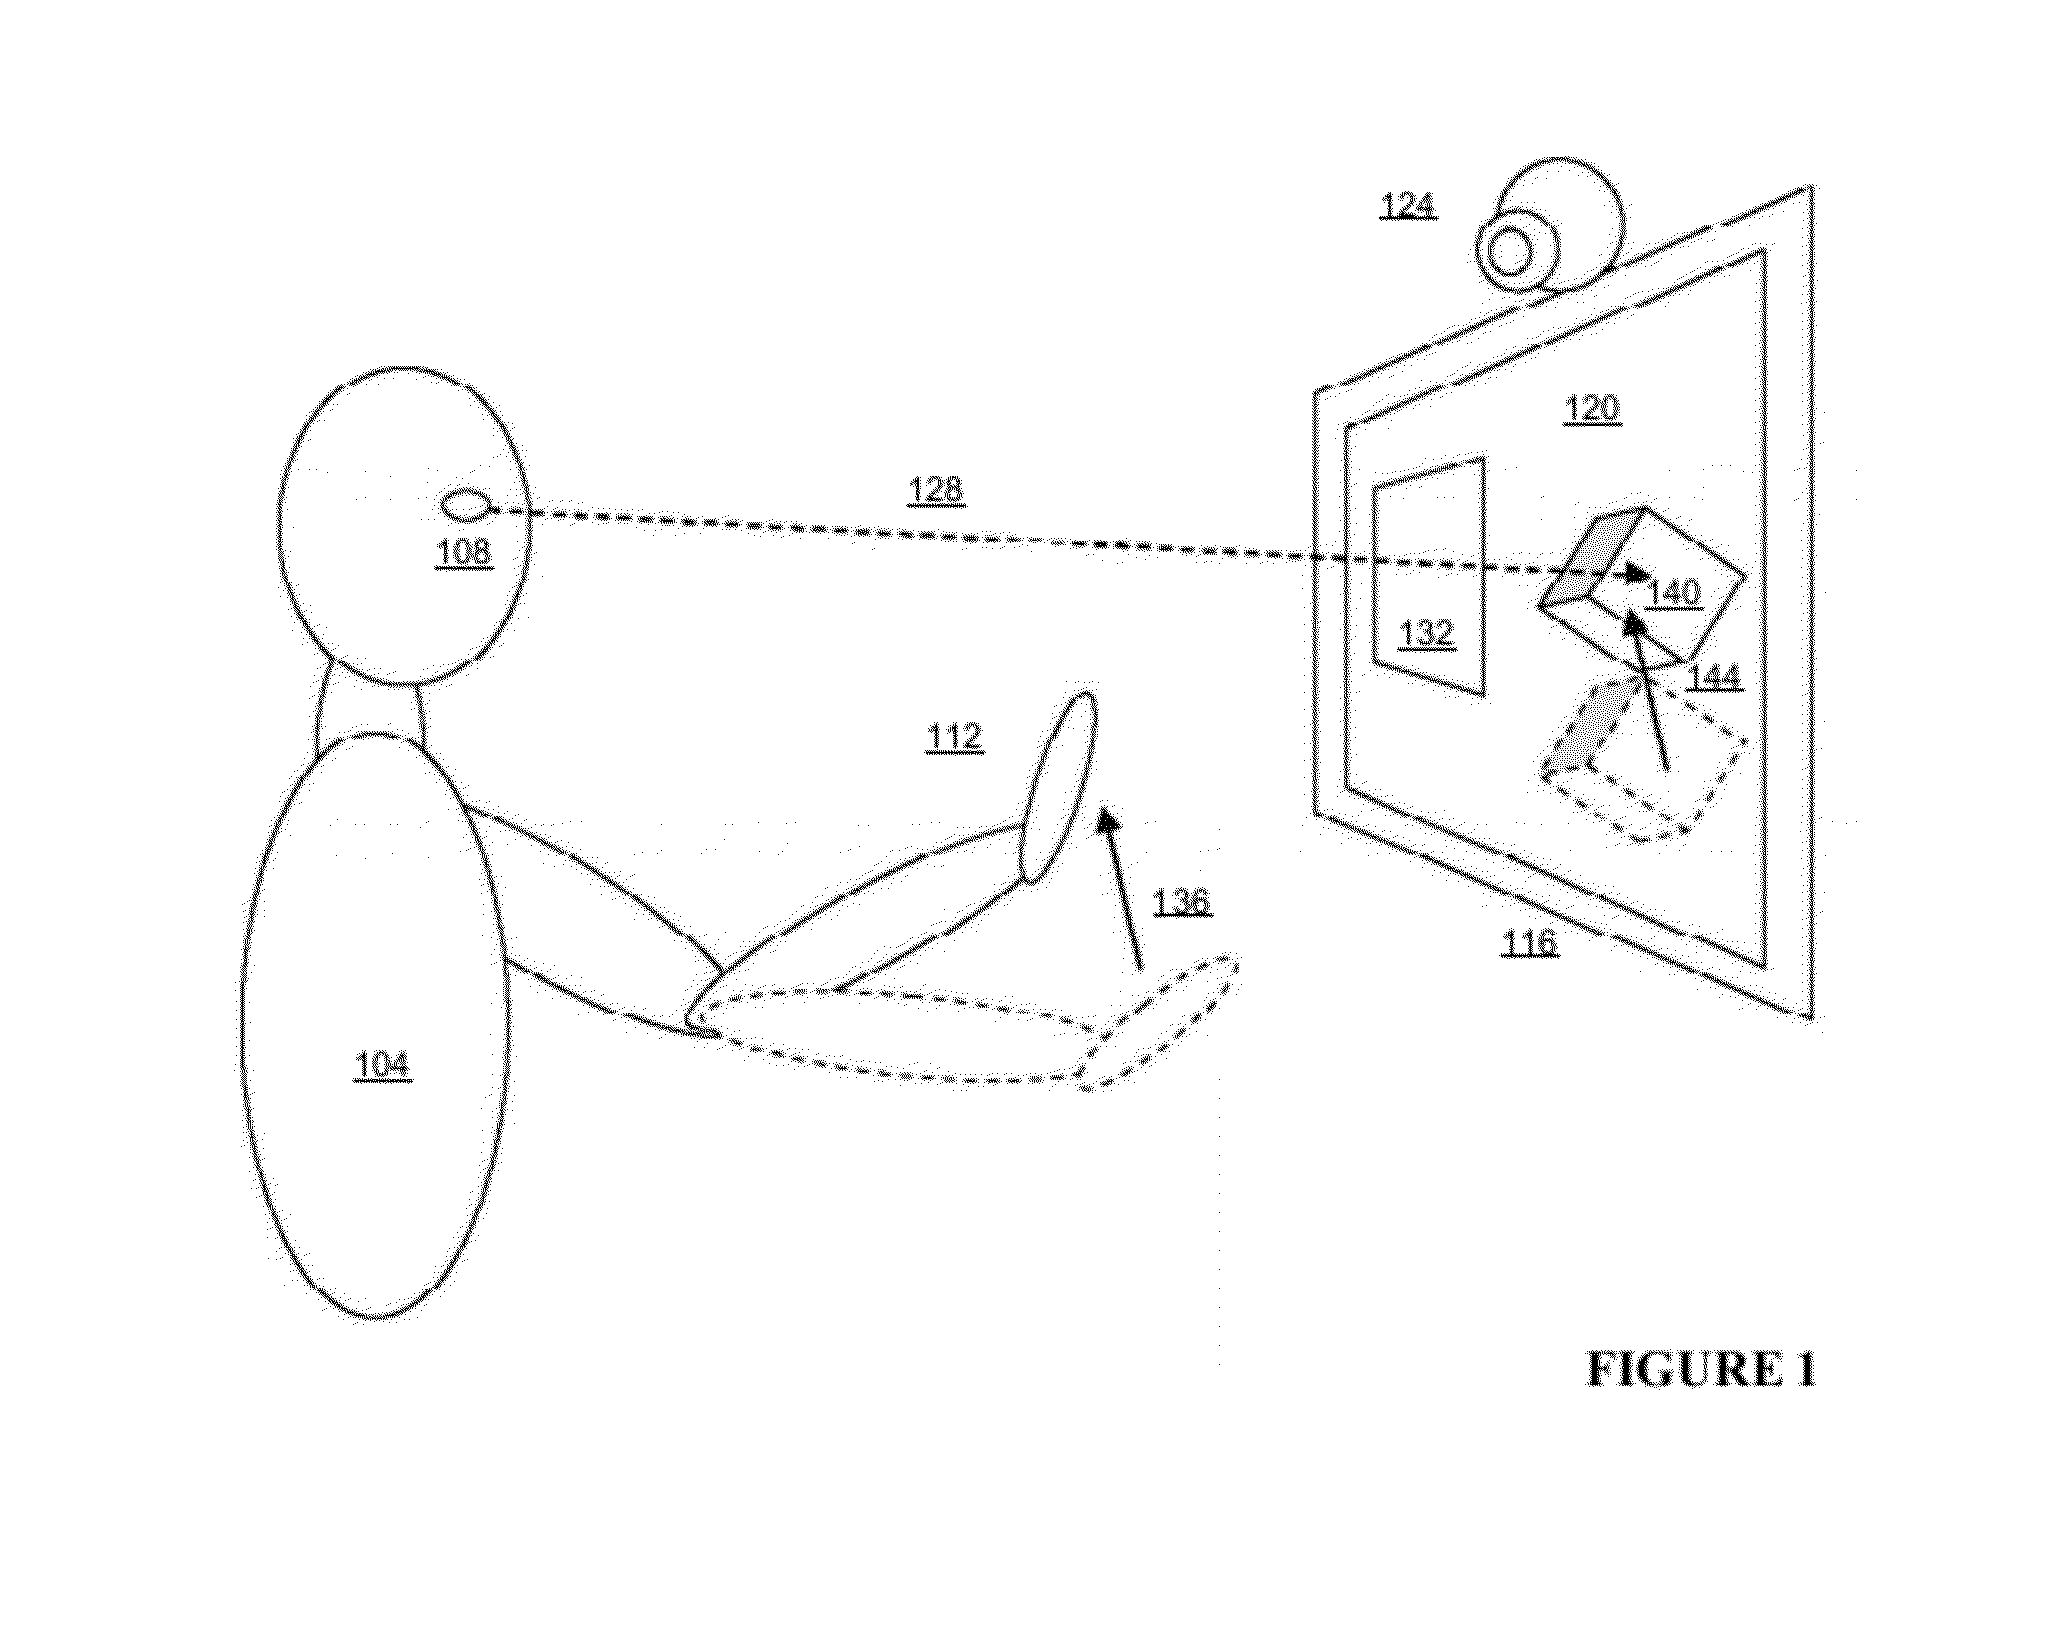 Systems and methods for providing feedback by tracking user gaze and gestures